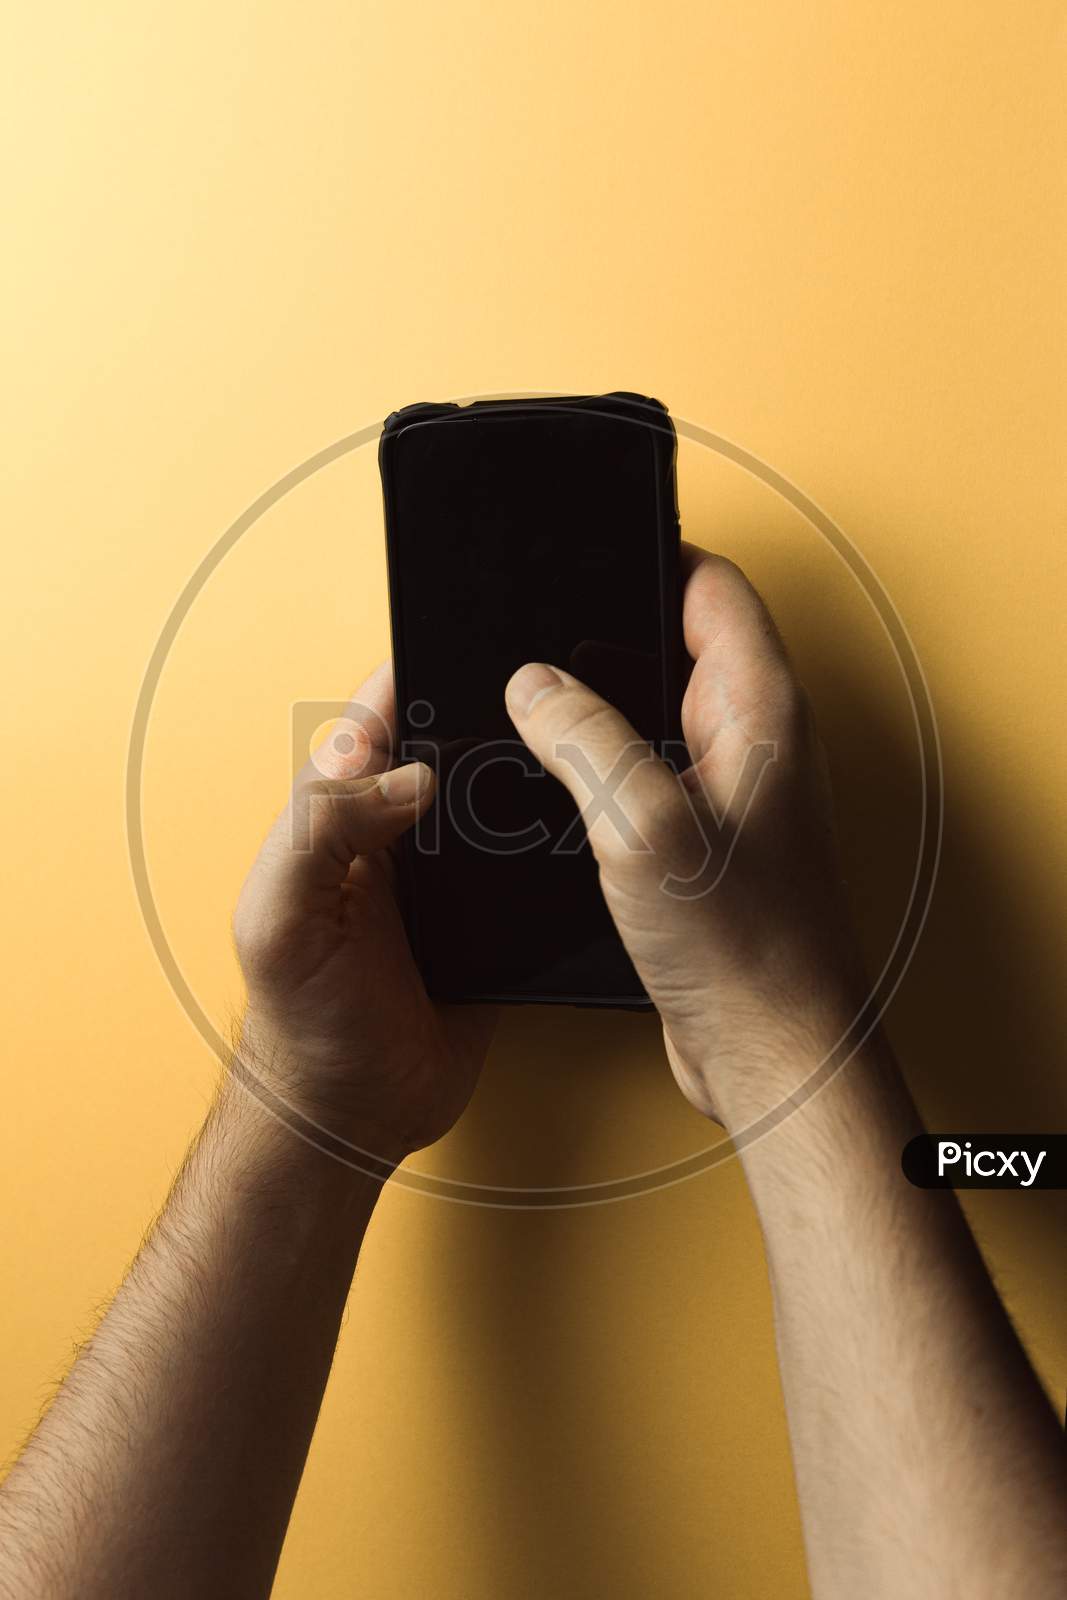 Top View Of Two Young Hands Using A Mobile Phone With Copy Space And A Black Screen Over A Pink Yellow Background